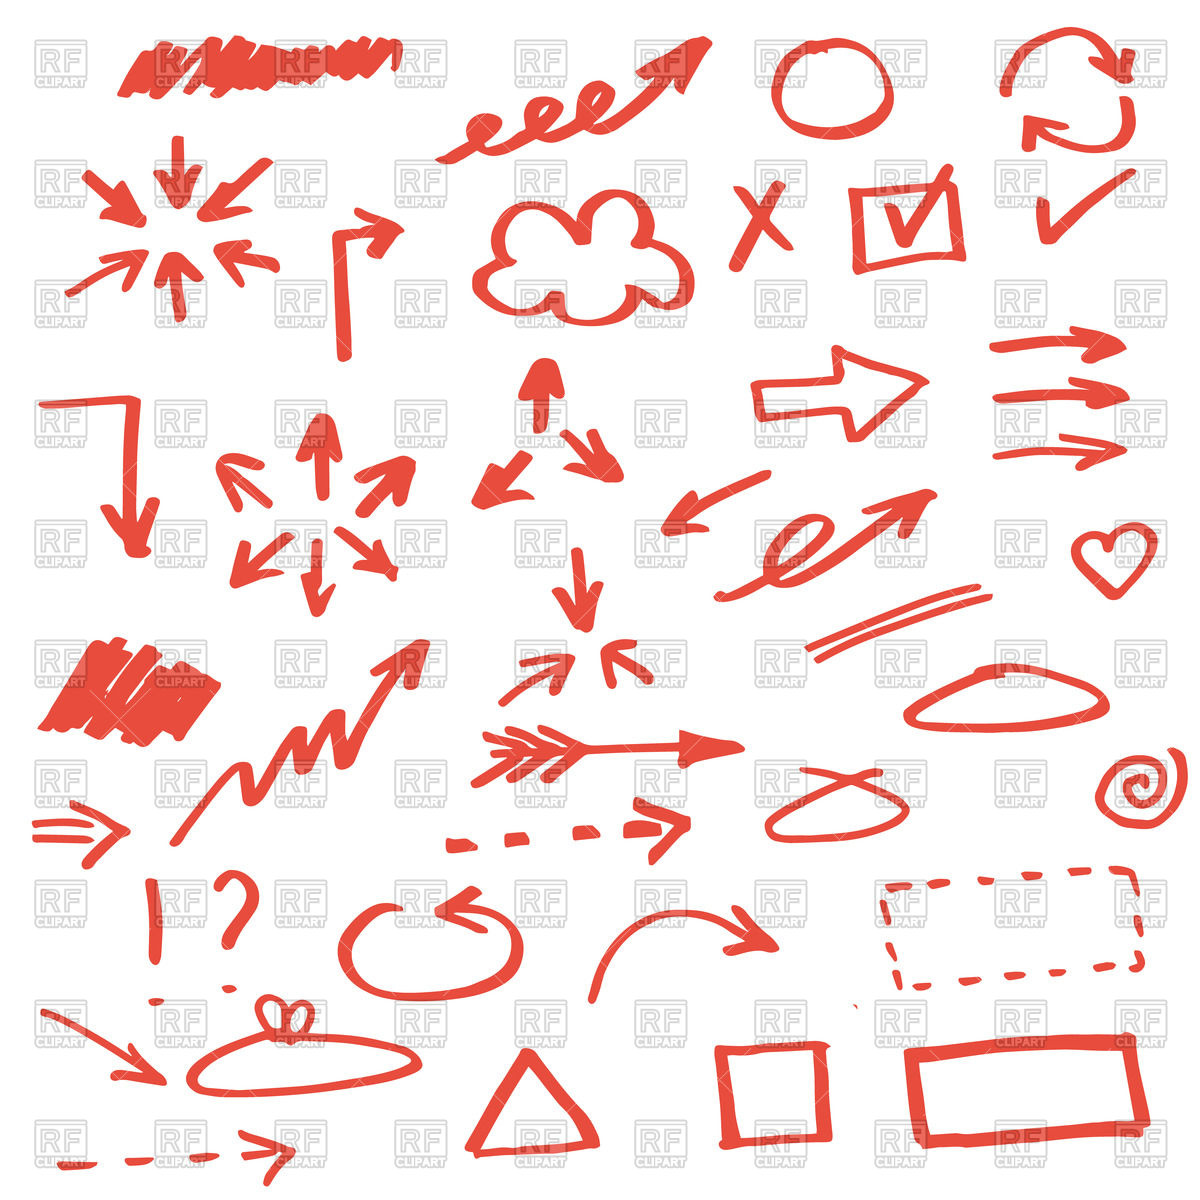 Hand Drawn Sketchy Arrows Download Royalty Free Vector Clipart  Eps